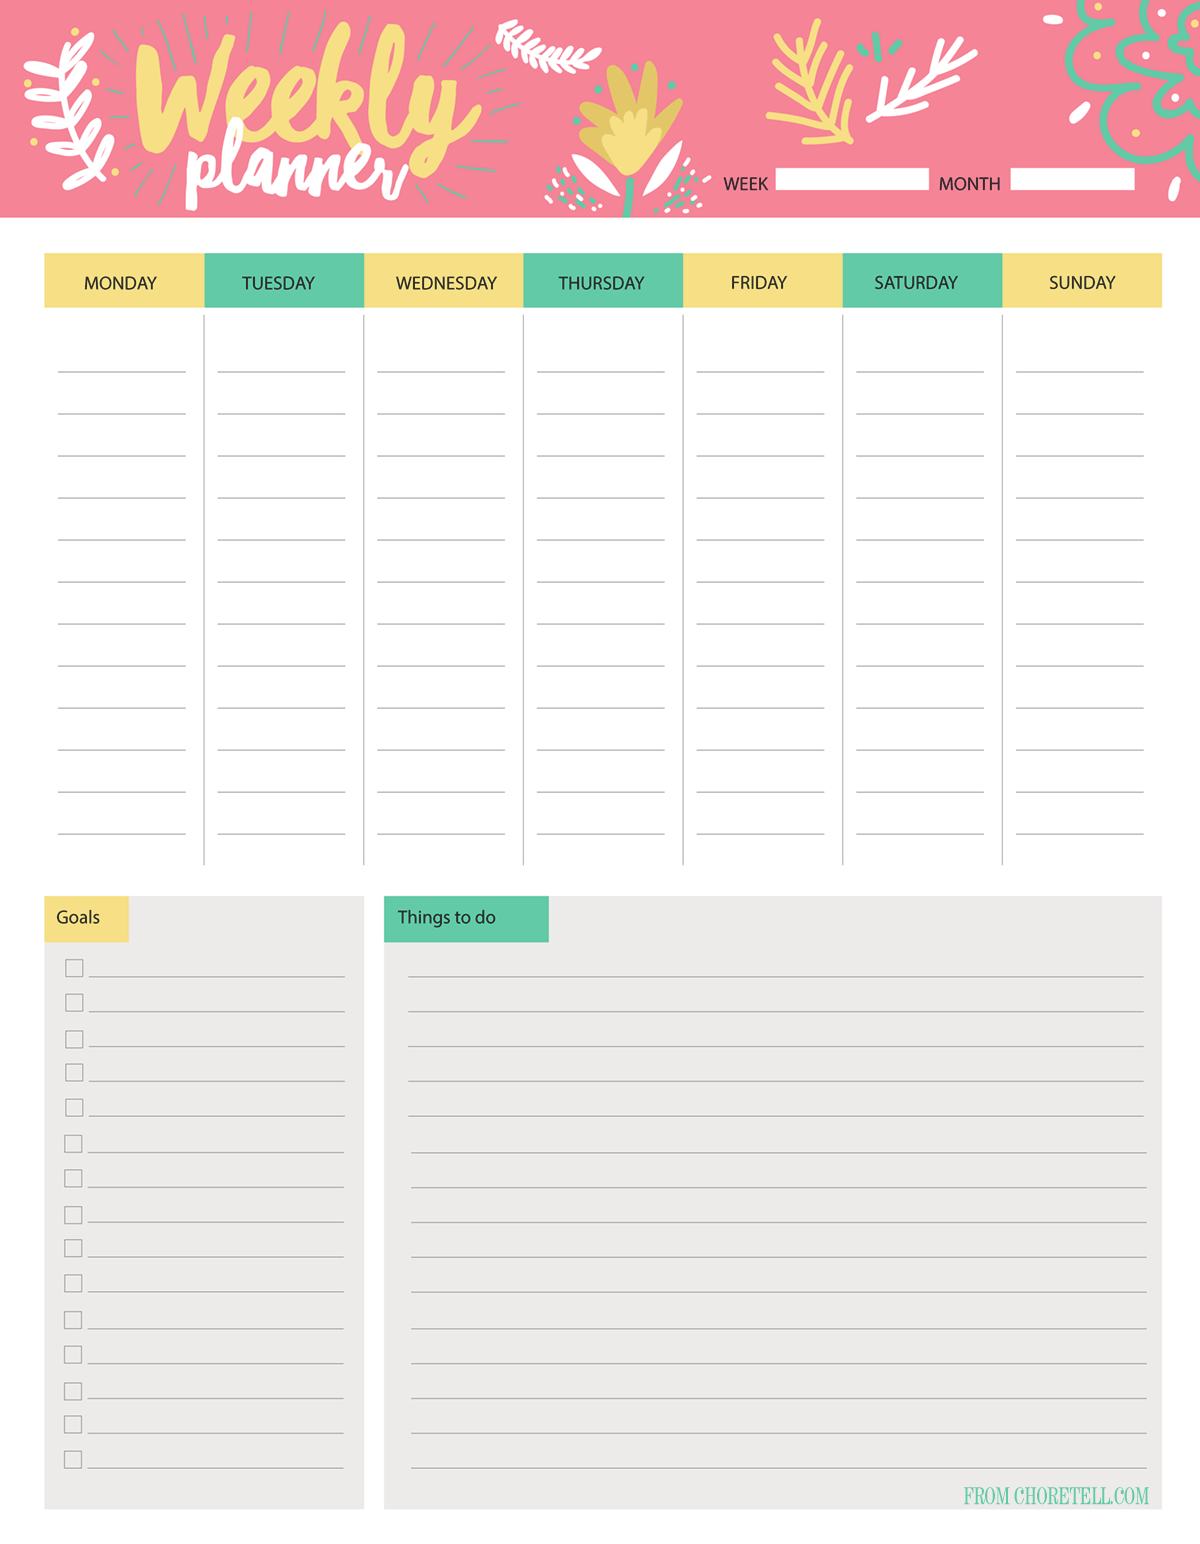 Weekly planner & to-do list free download - Free printable downloads